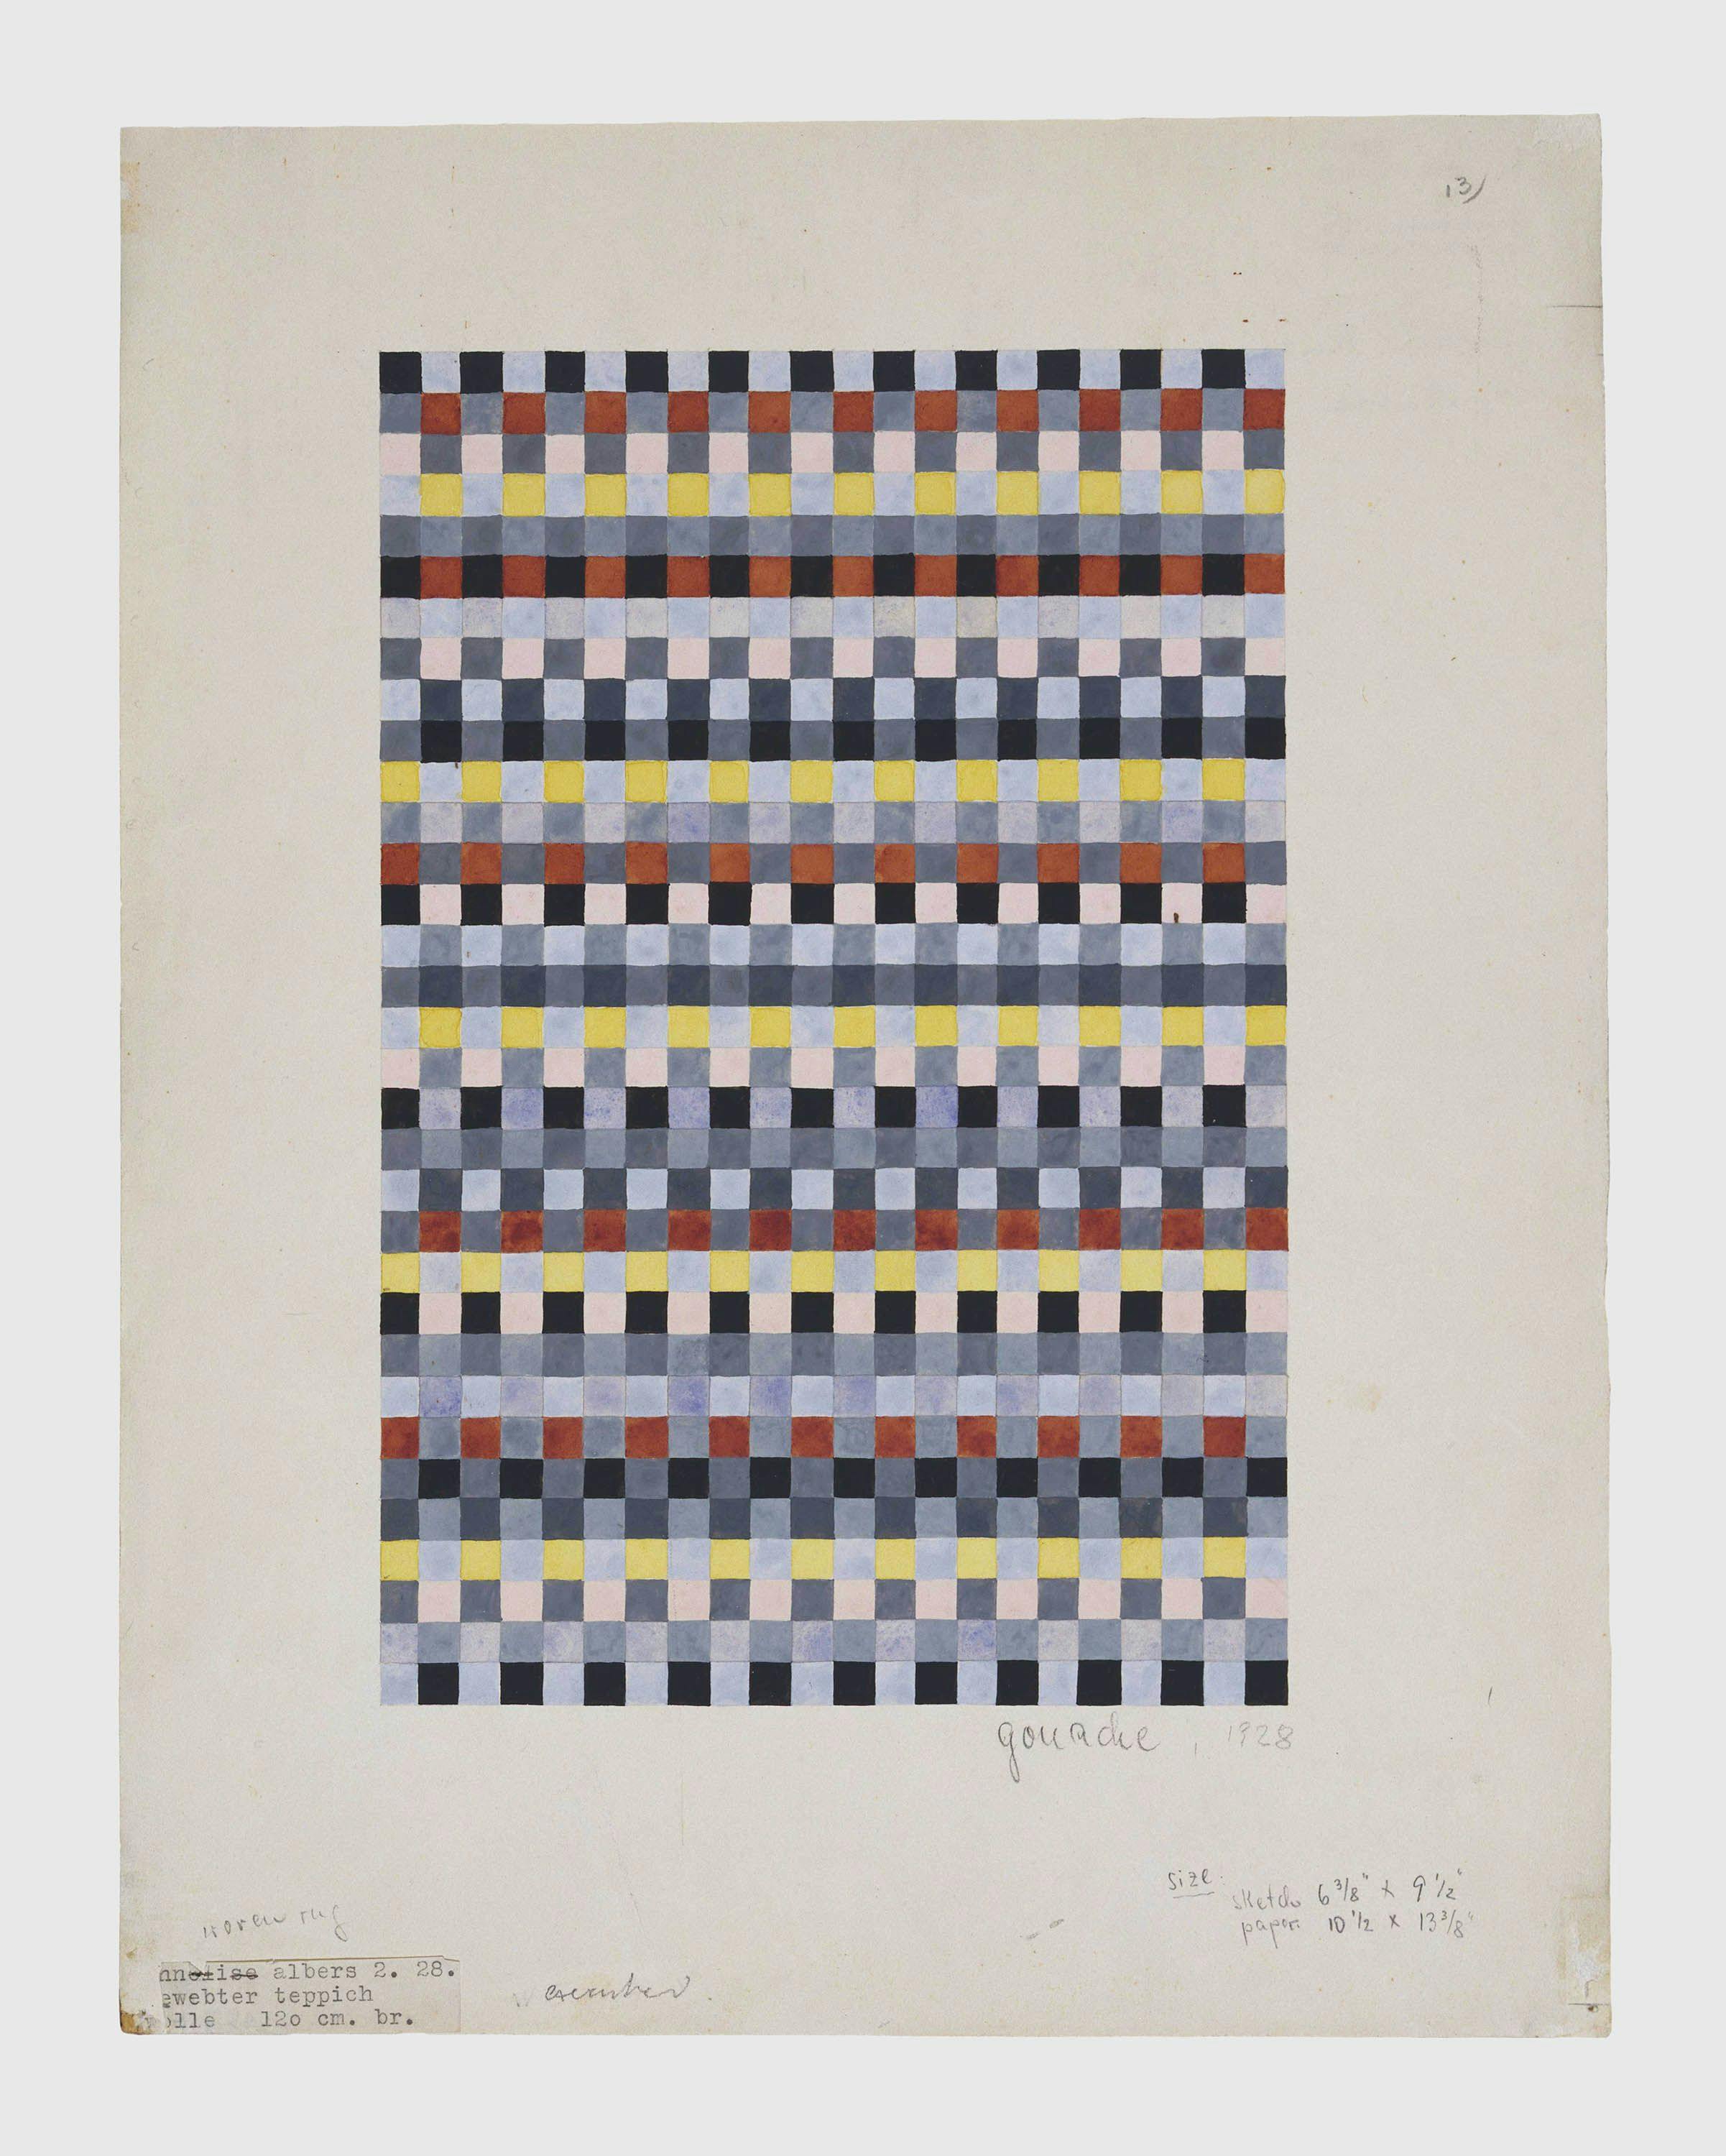 A drawing by Thomas Ruff, titled Rug Design for a Child's Room, dated 1928.